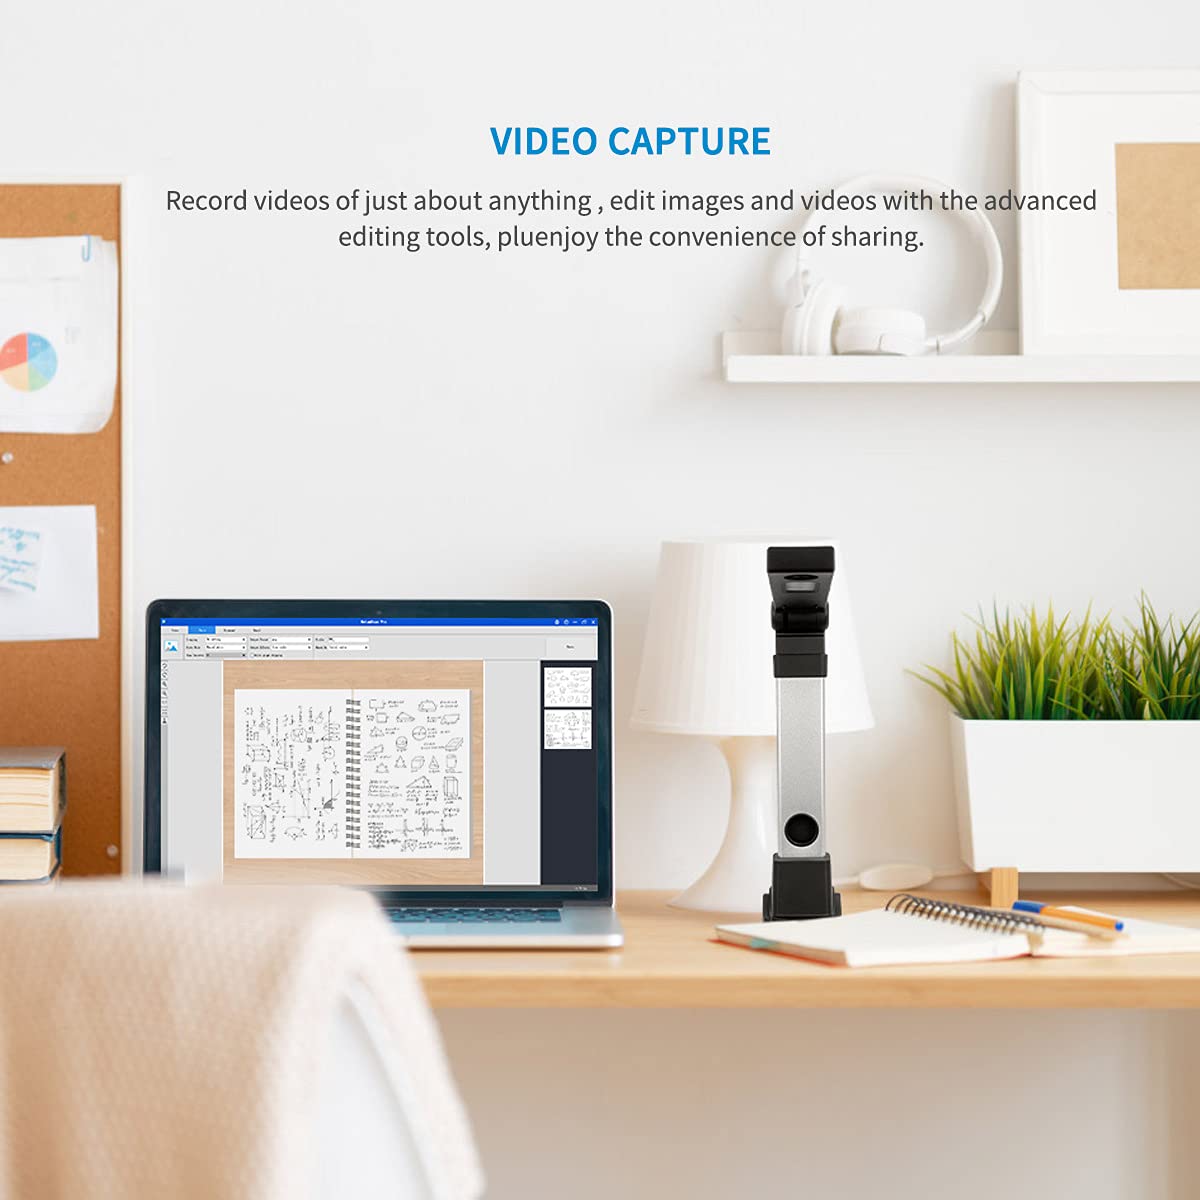 NetumScan Book & Document Camera for Teachers, Multi-Language OCR and English Article Recognition by AI Technology, Real-time Projection, Video Recording, Foldable & Portable, Only Windows